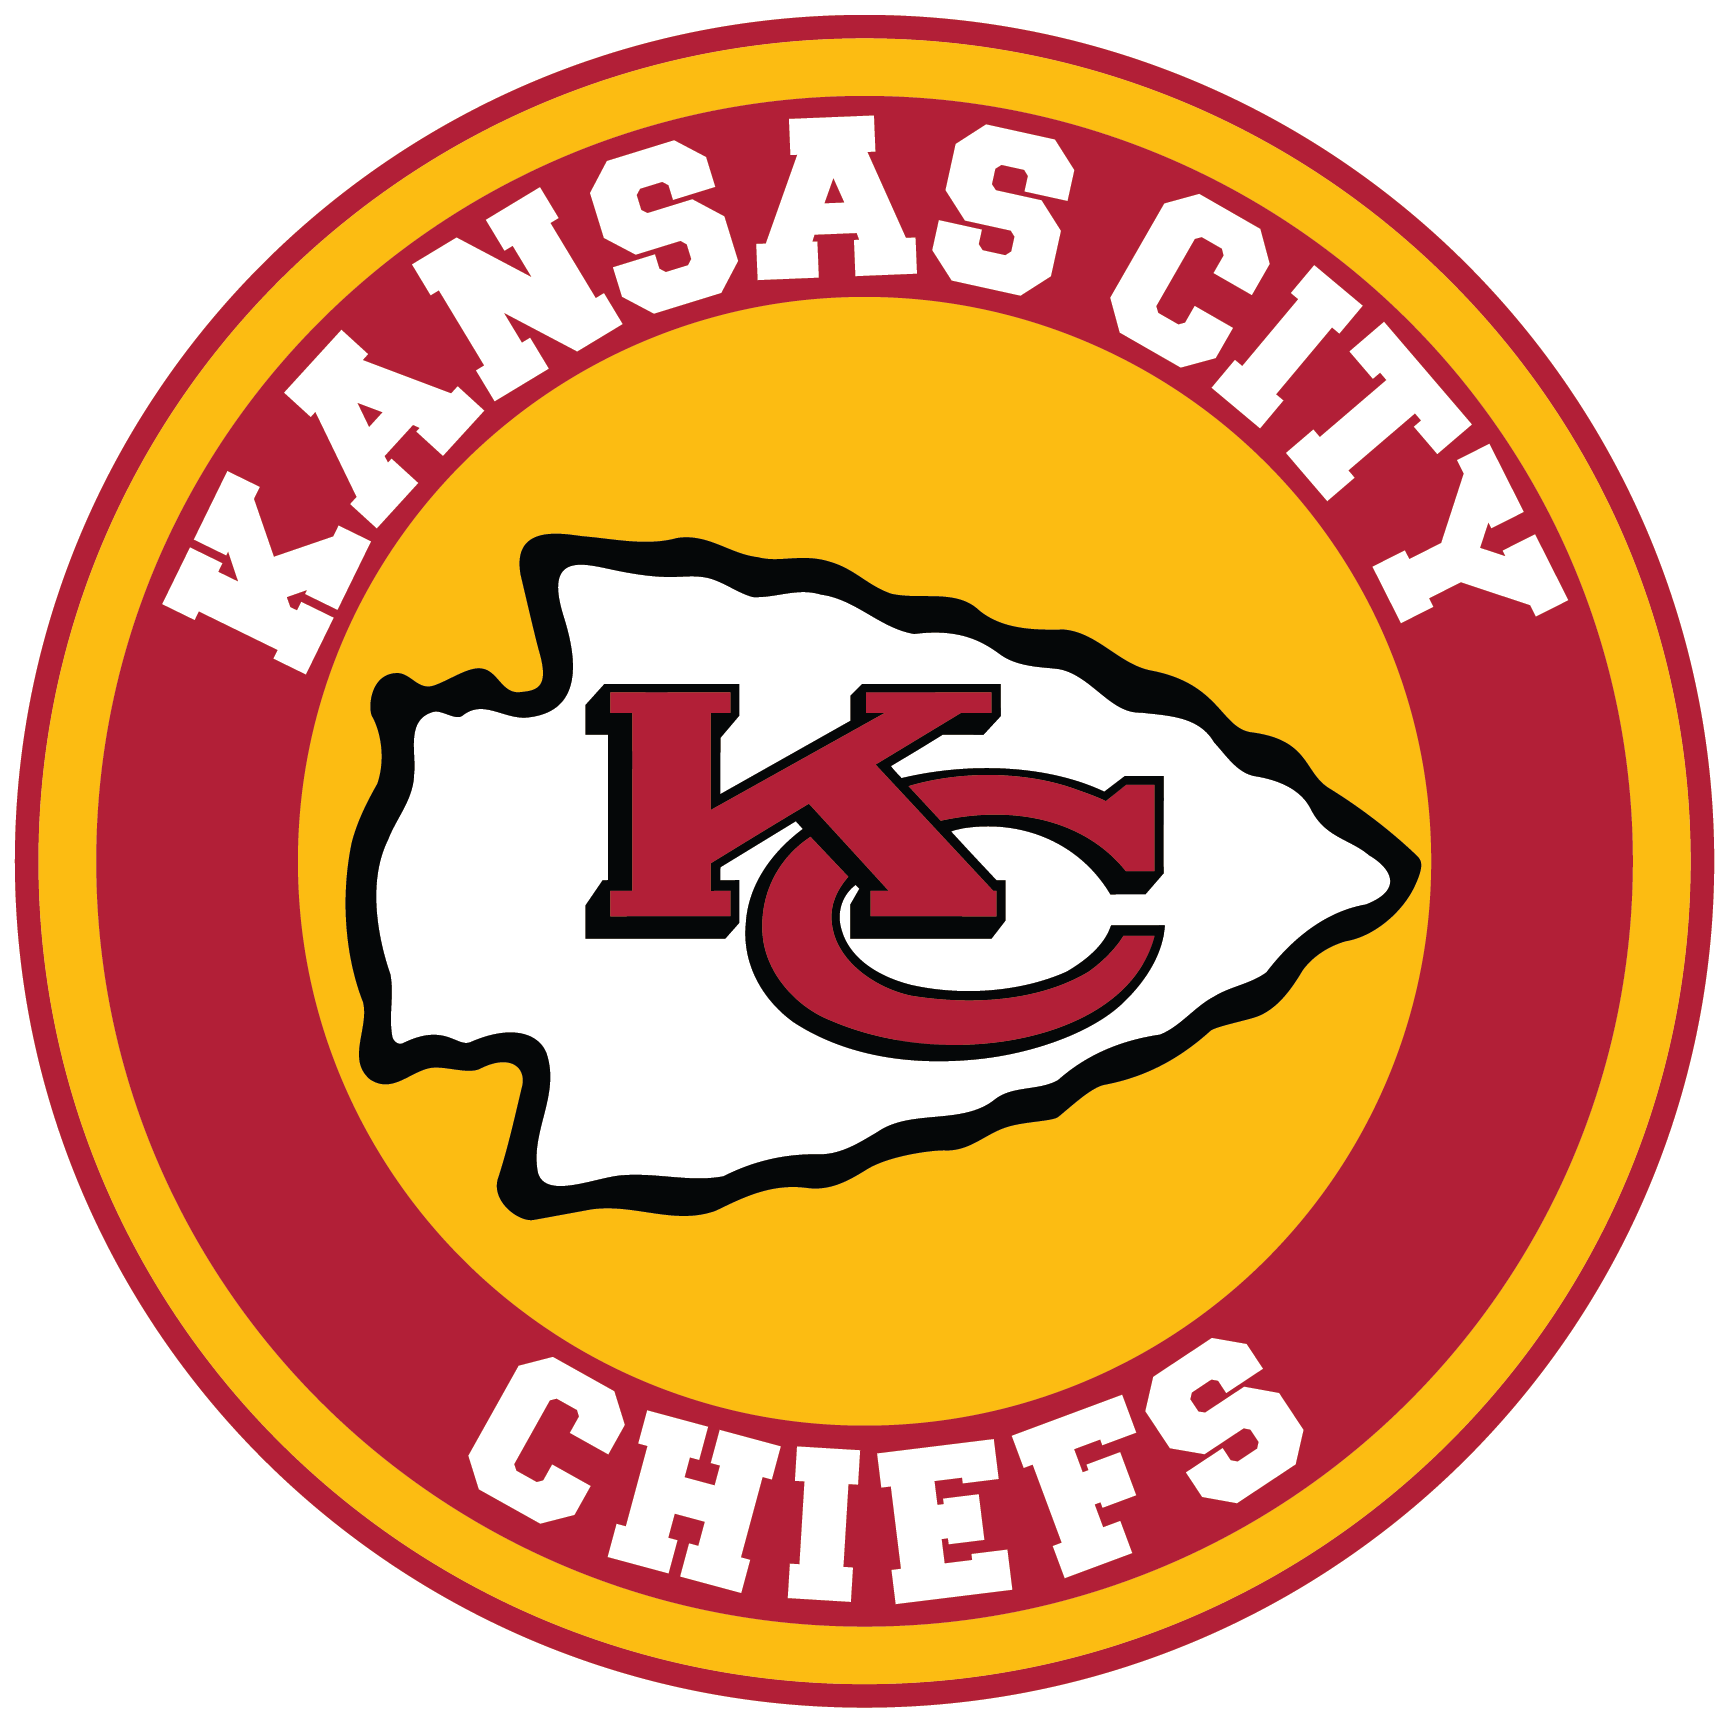 Chiefs Logo PNG Picture